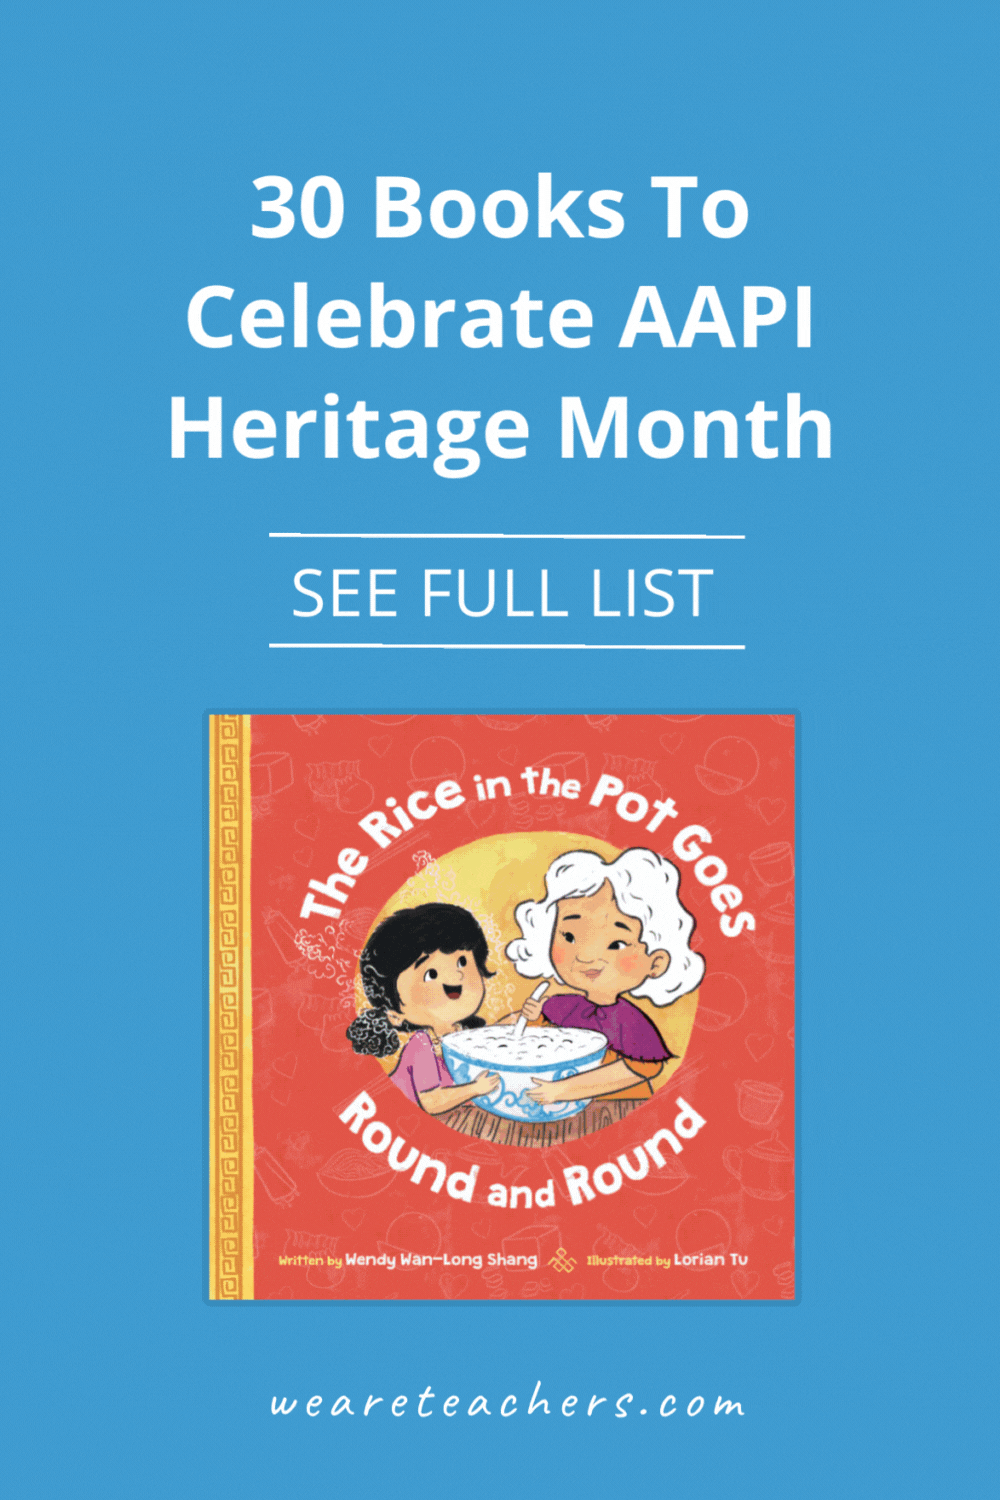 These diverse AAPI books help children both see themselves in literature and learn more about different cultures.